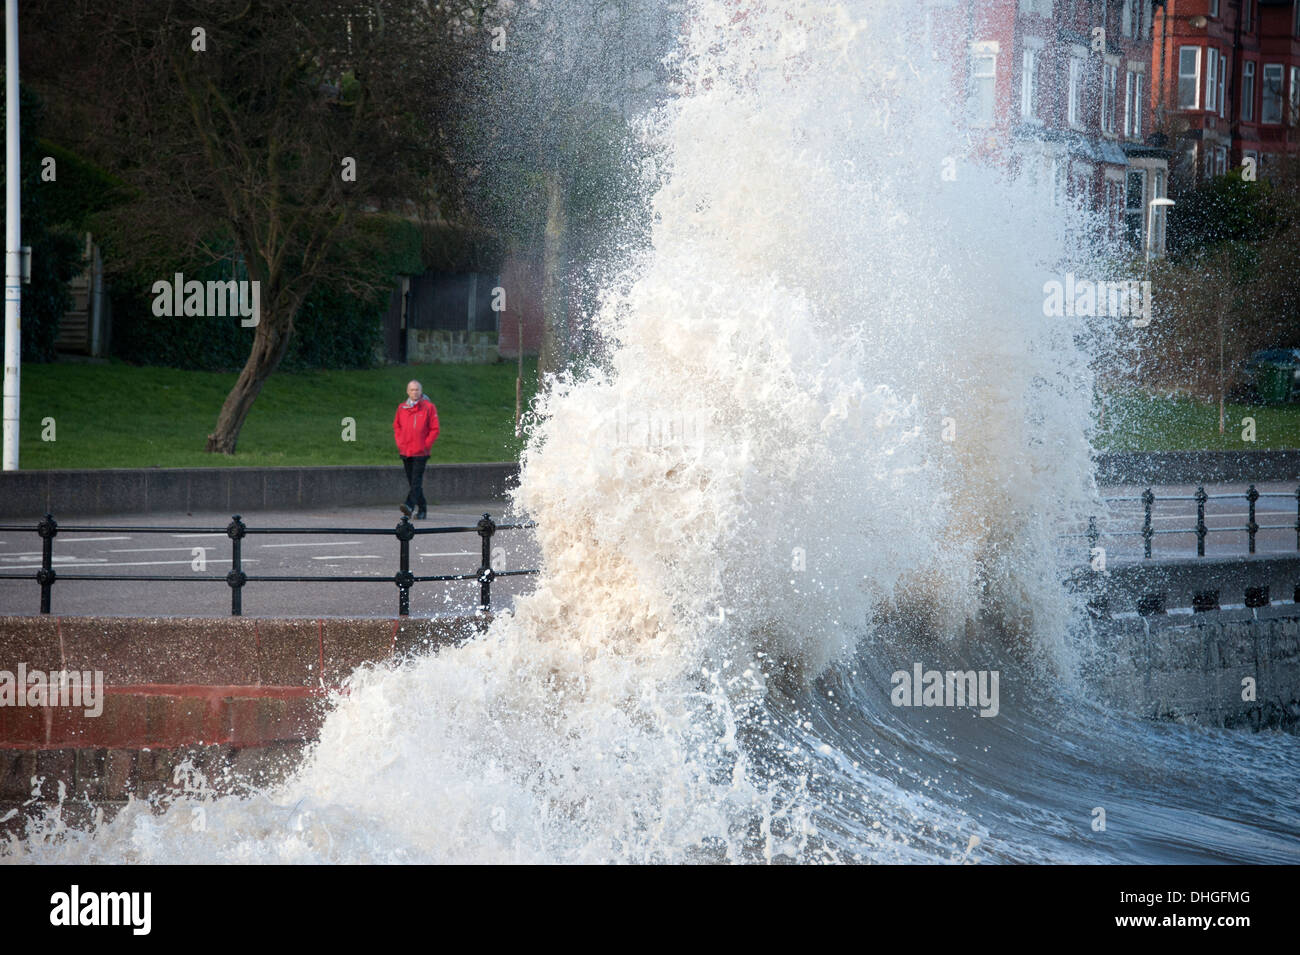 Sea Waves Crashing over wall stormy windy weather Stock Photo